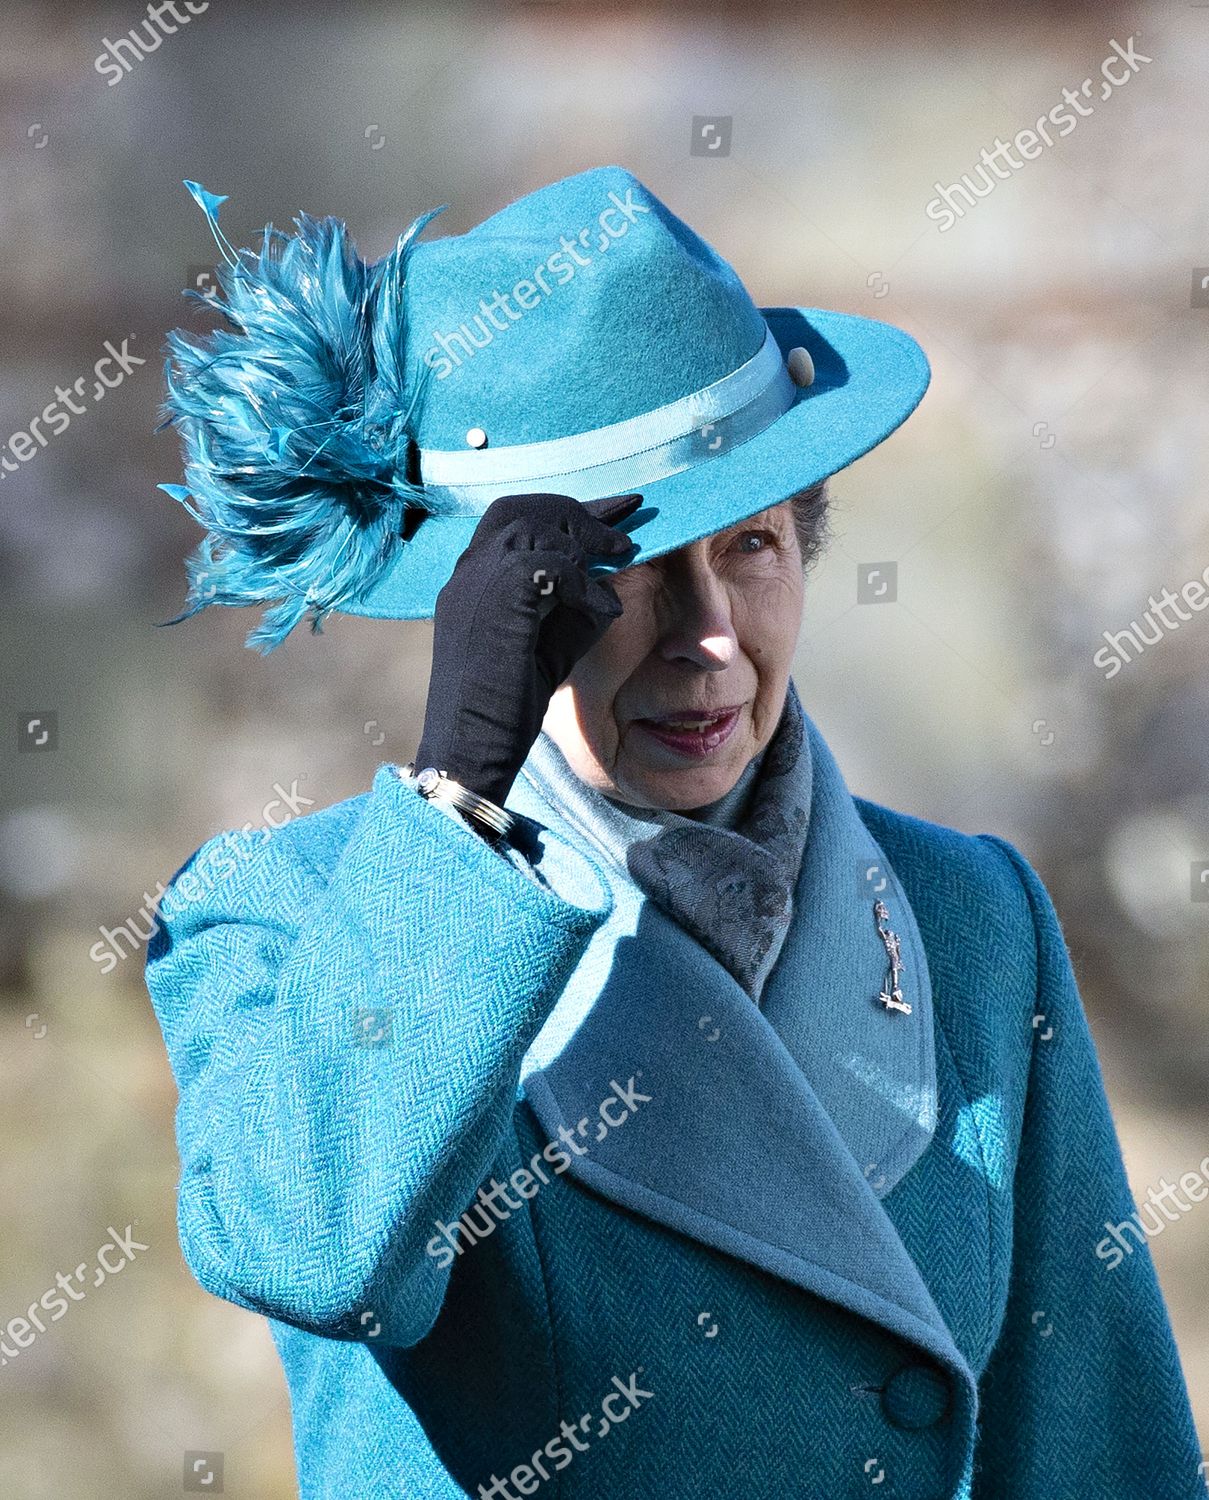 princess-anne-attends-the-royal-corps-of-signals-centenary-service-salisbury-cathedral-wiltshire-uk-shutterstock-editorial-10570519f.jpg